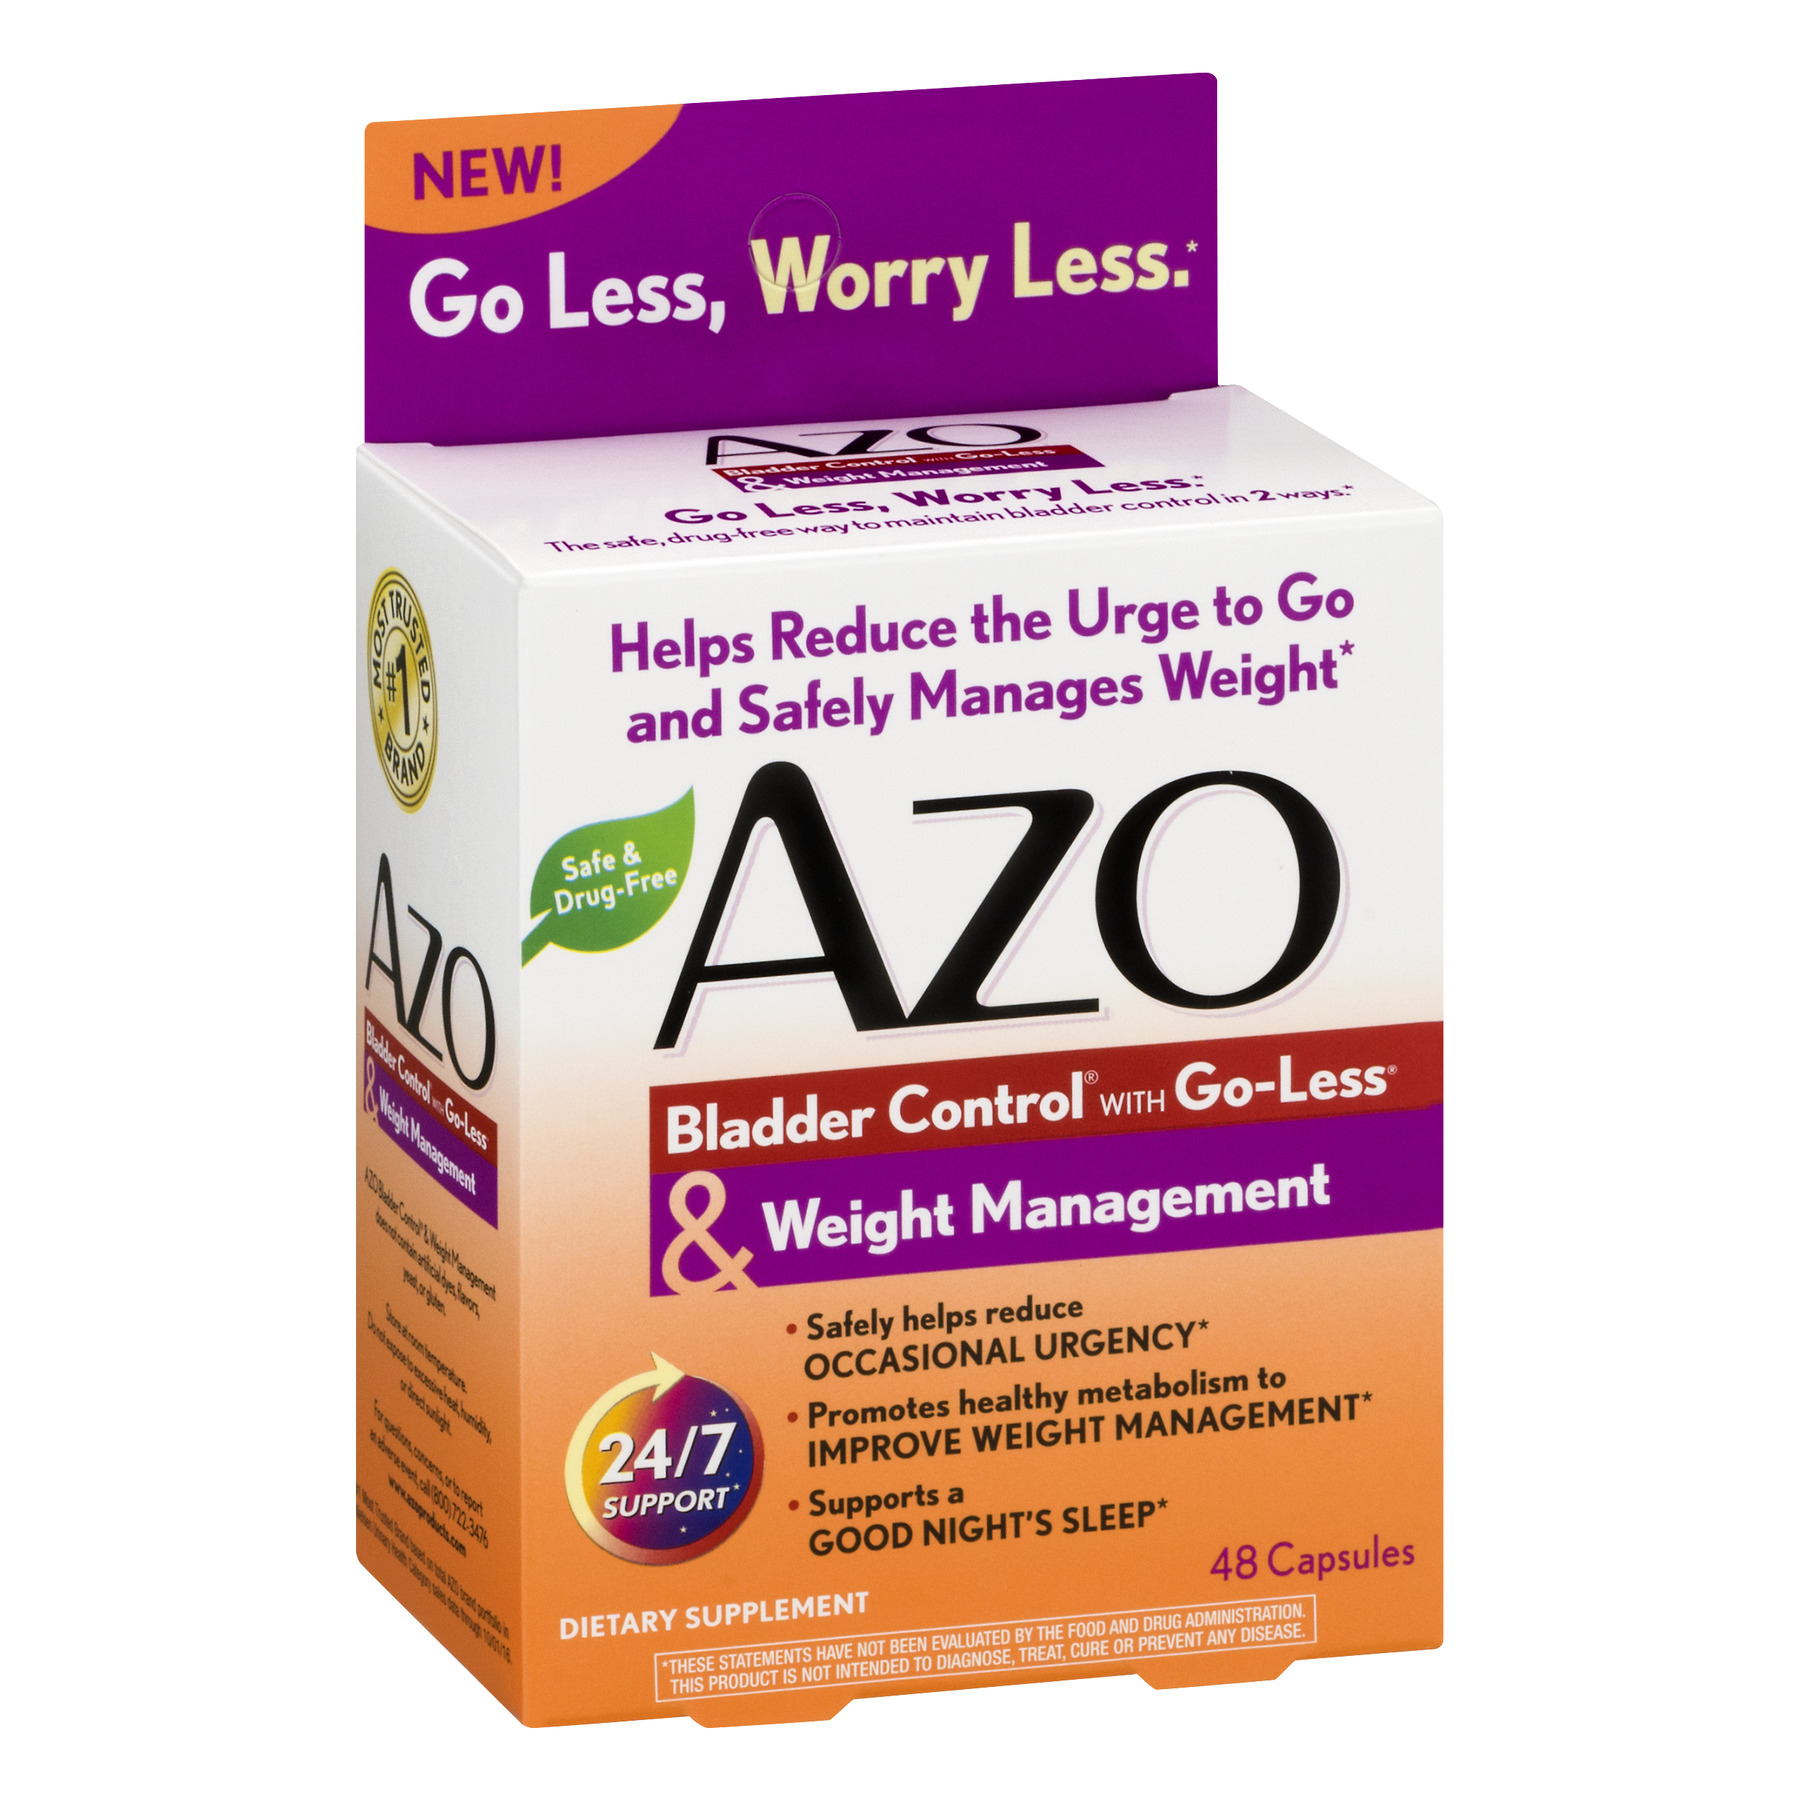 AZO Bladder Control and Weight Management Dietary Supplement, 48 Capsules - image 4 of 8